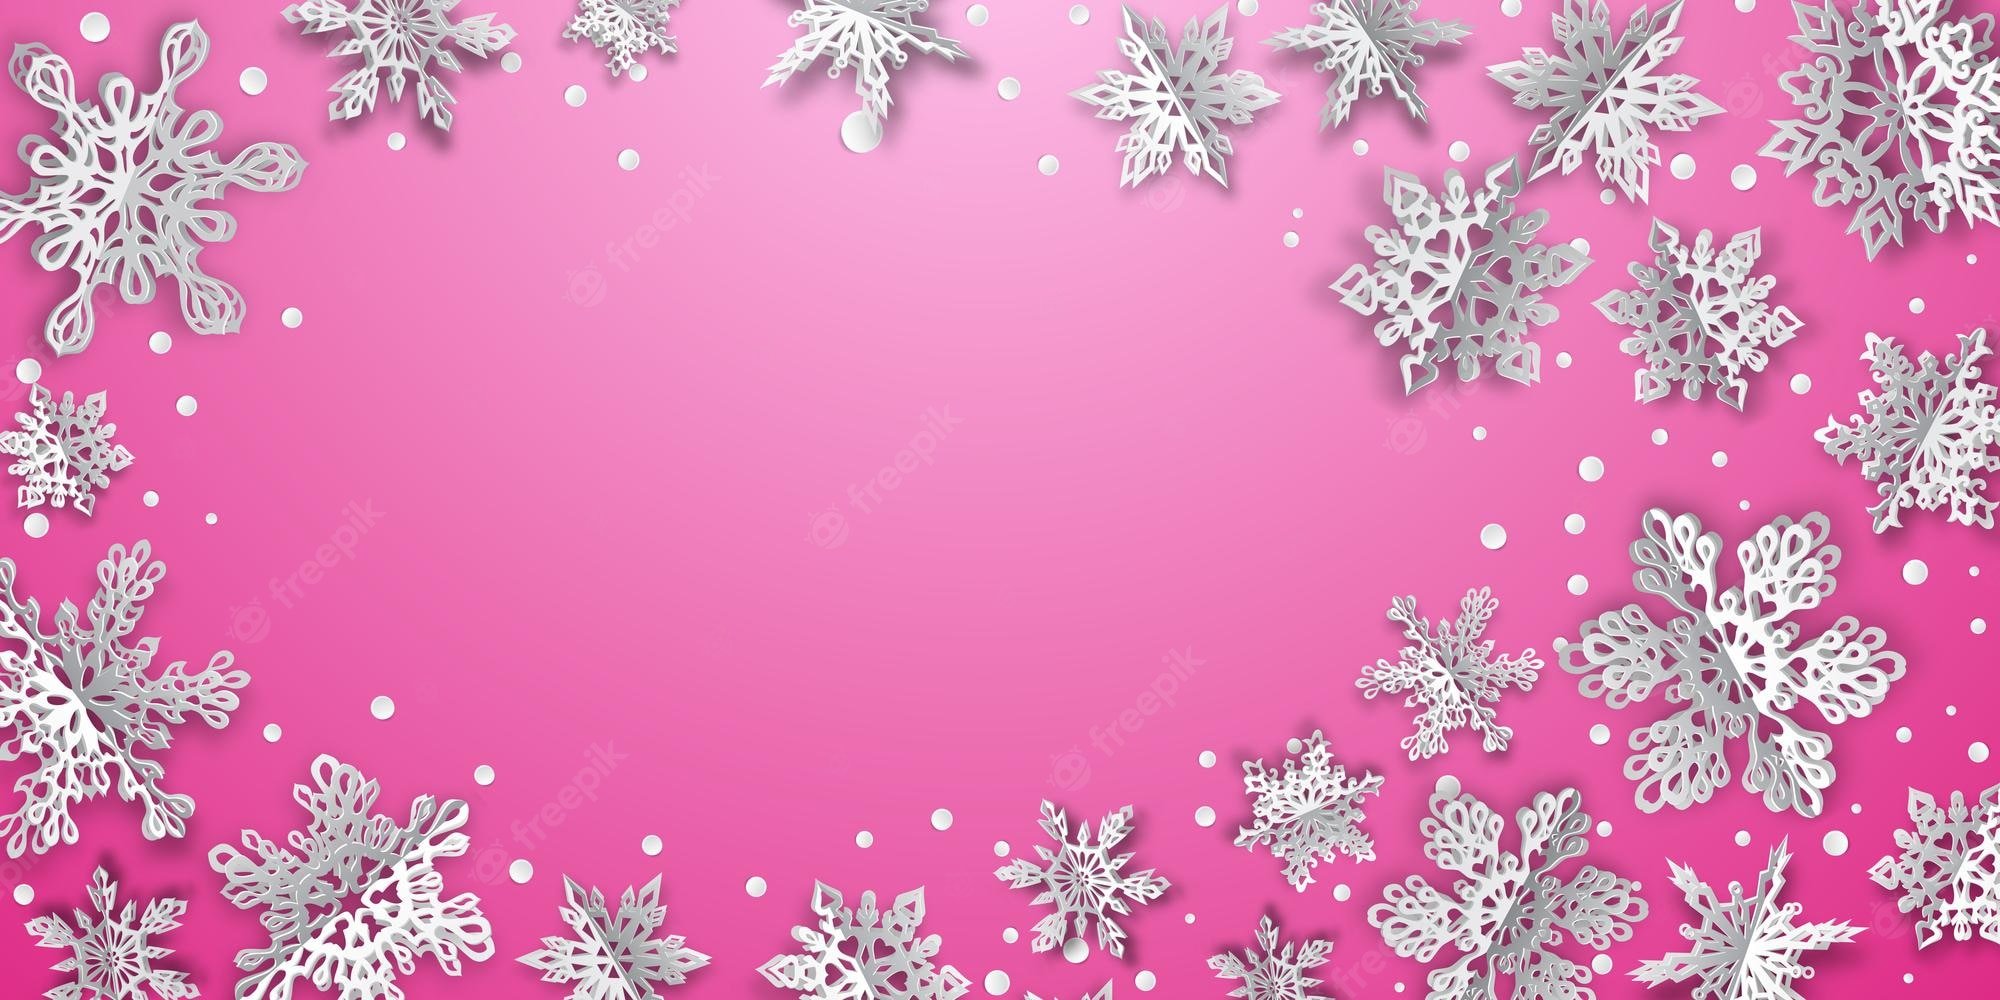 Premium Vector. Christmas background with volume paper snowflakes with soft shadows on pink background